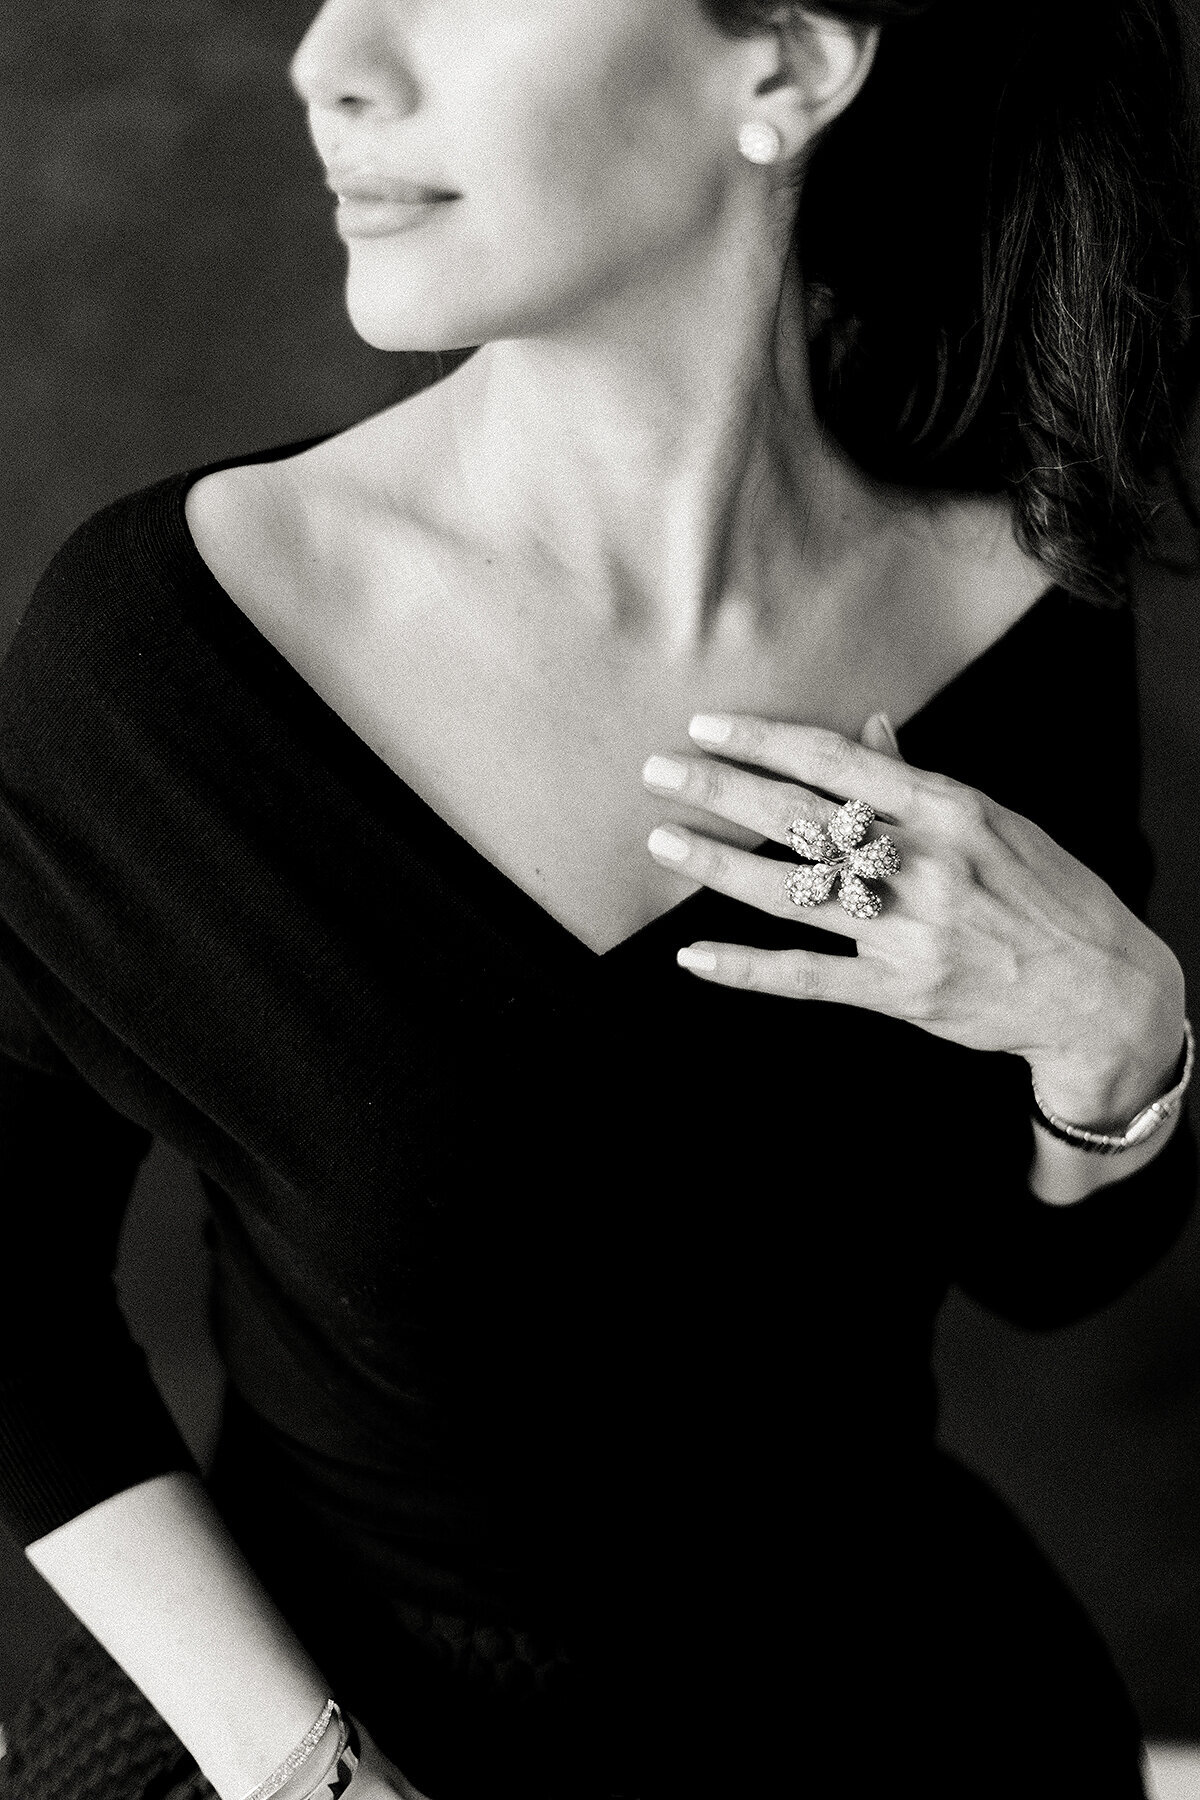 An elegant black and white boudoir photo of a woman wearing a black dress and she delicately touches her chest while posing in a Dallas photography studio.